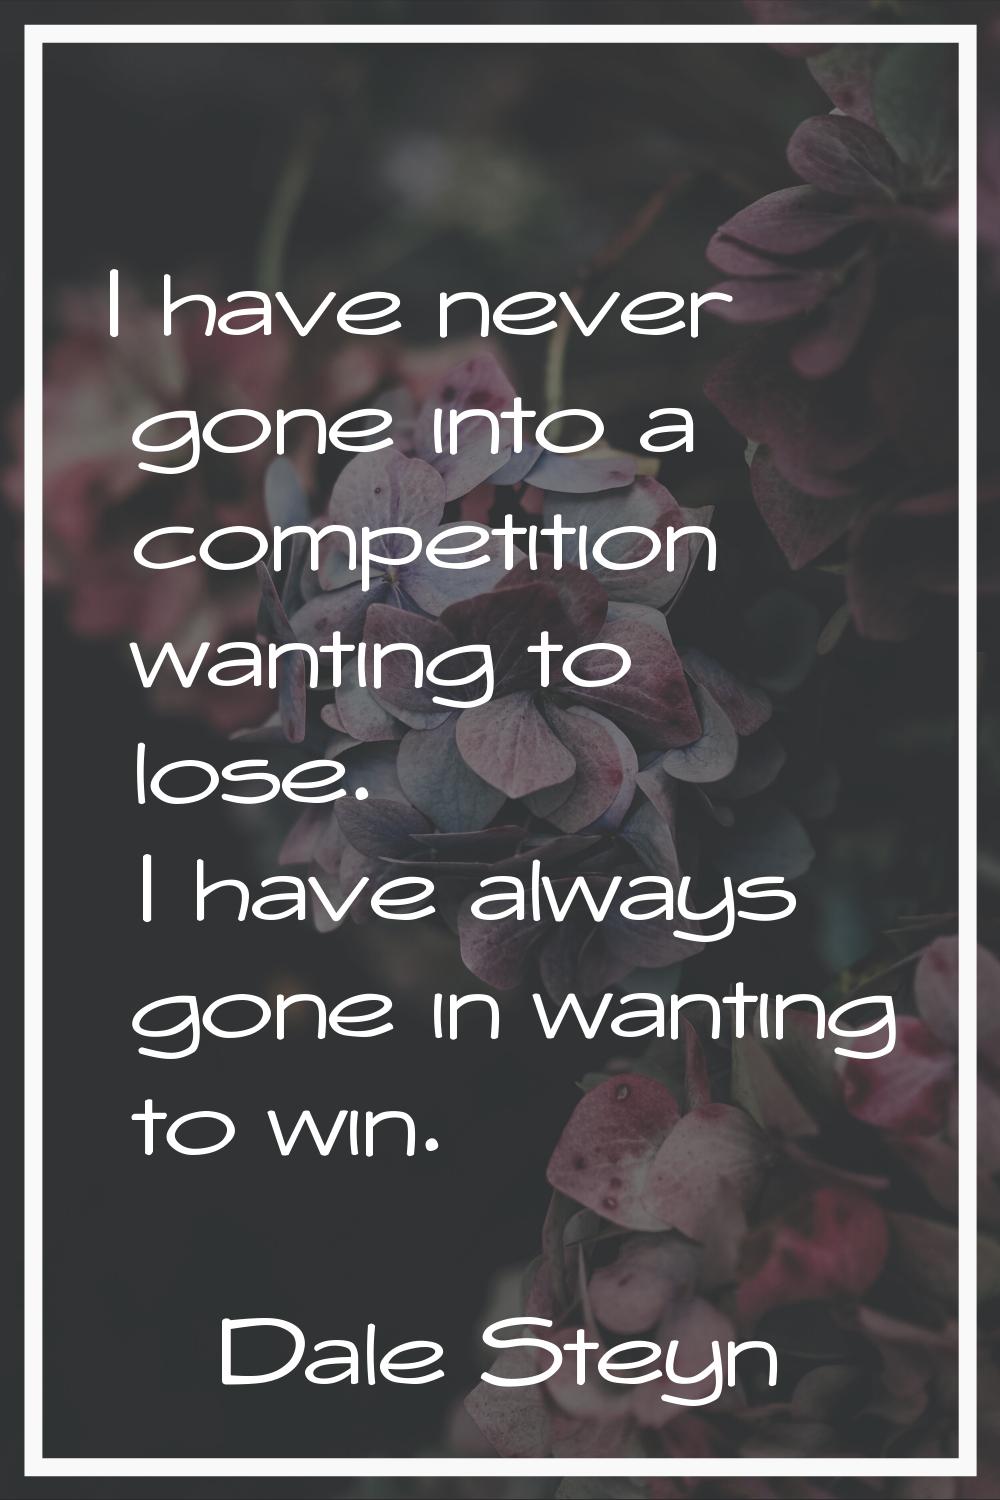 I have never gone into a competition wanting to lose. I have always gone in wanting to win.